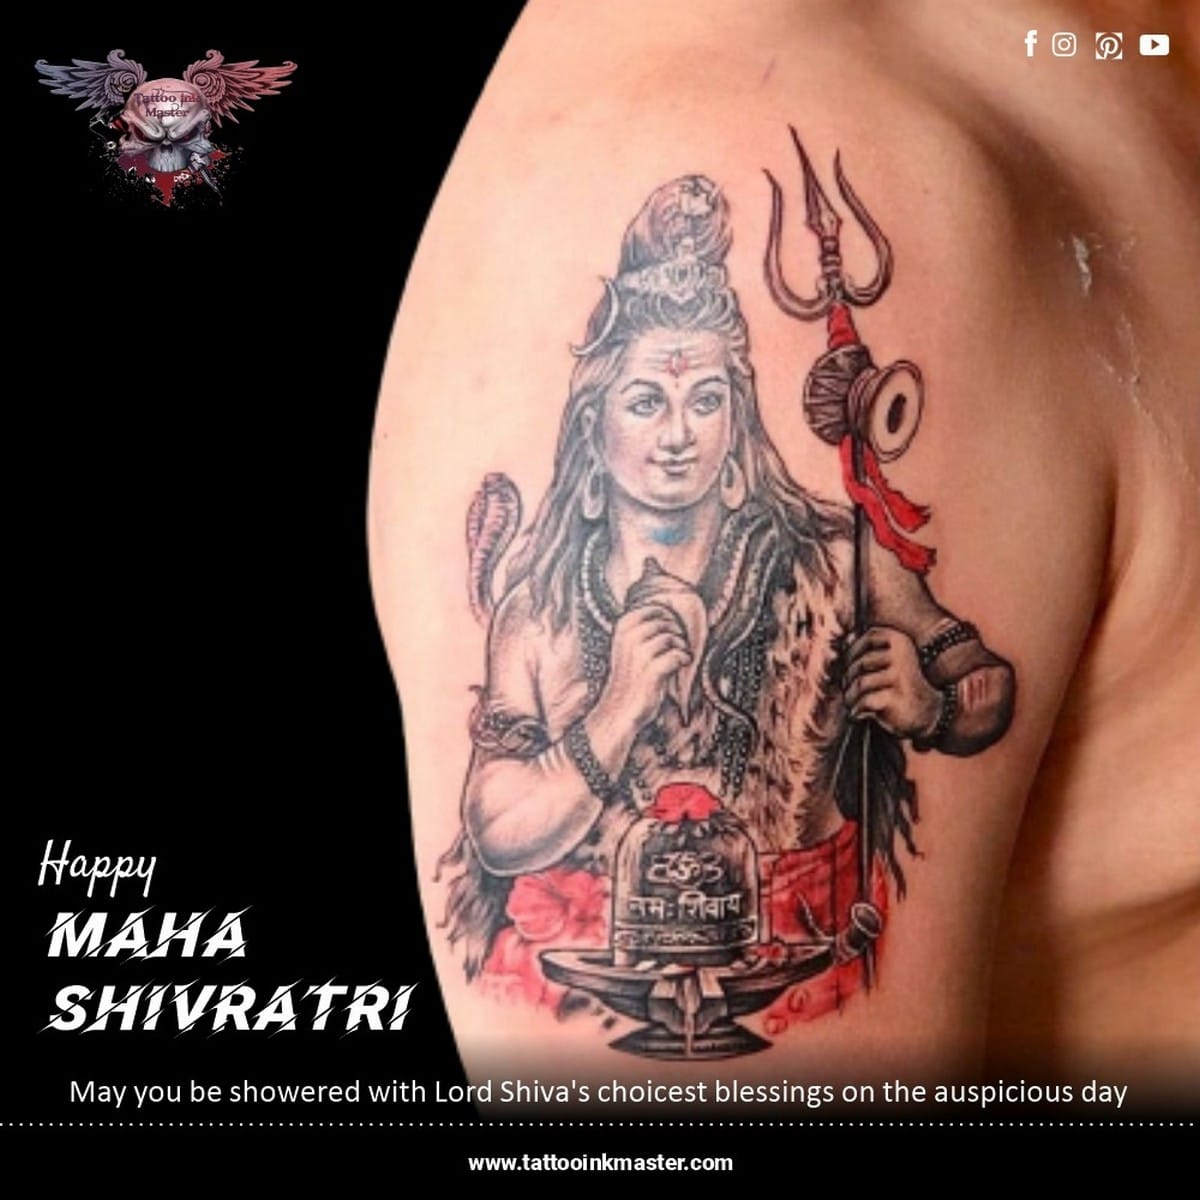 You are currently viewing Wish You a Very Happy Maha Shivratri